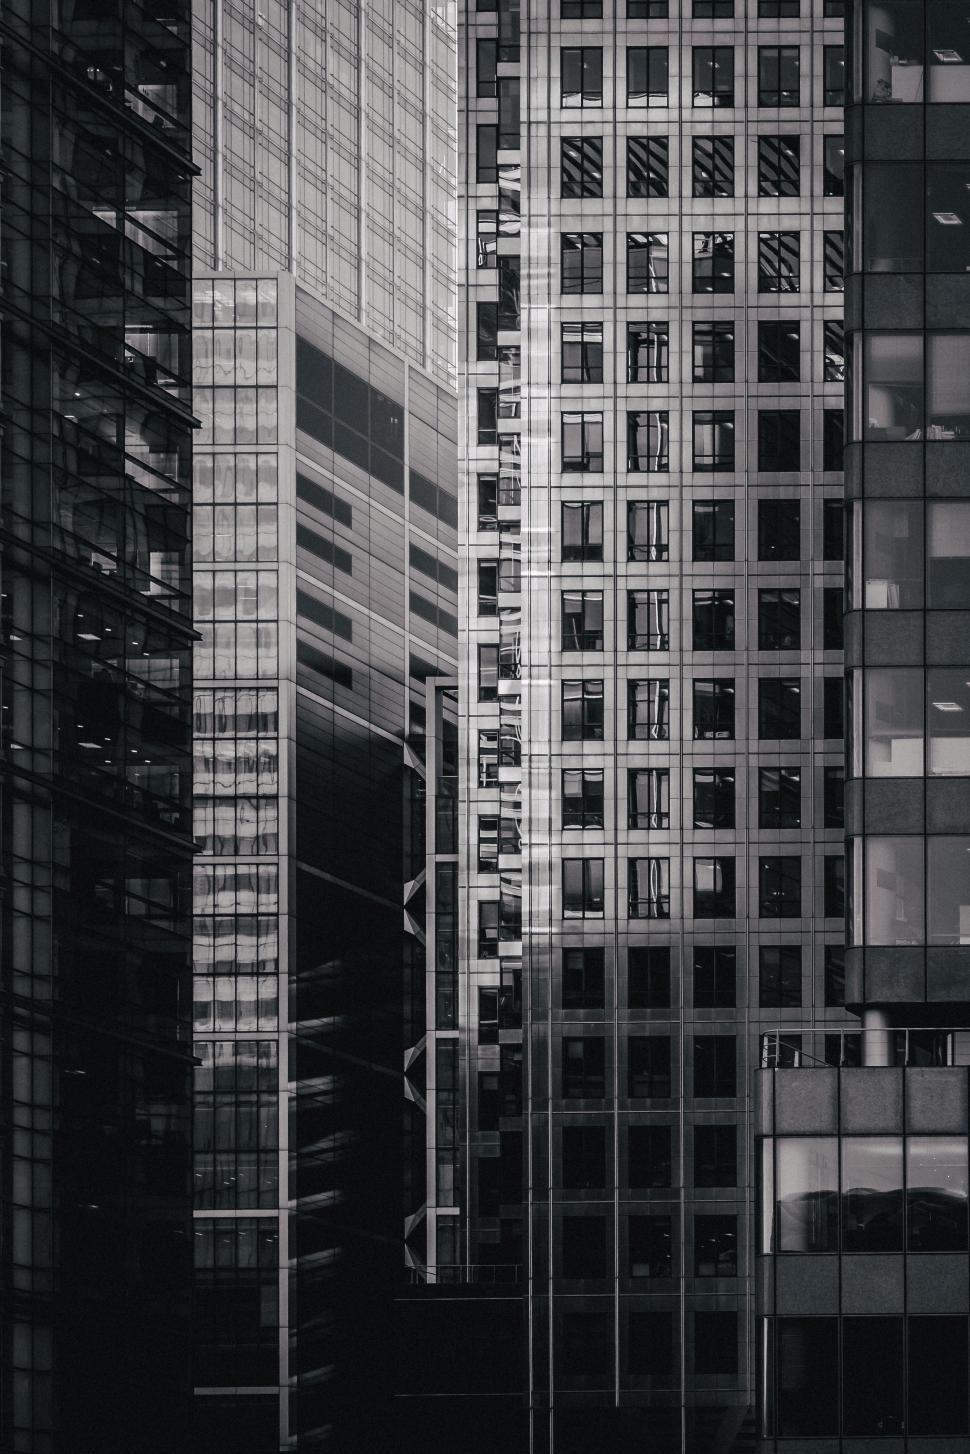 Free Image of Tall Buildings in Black and White 